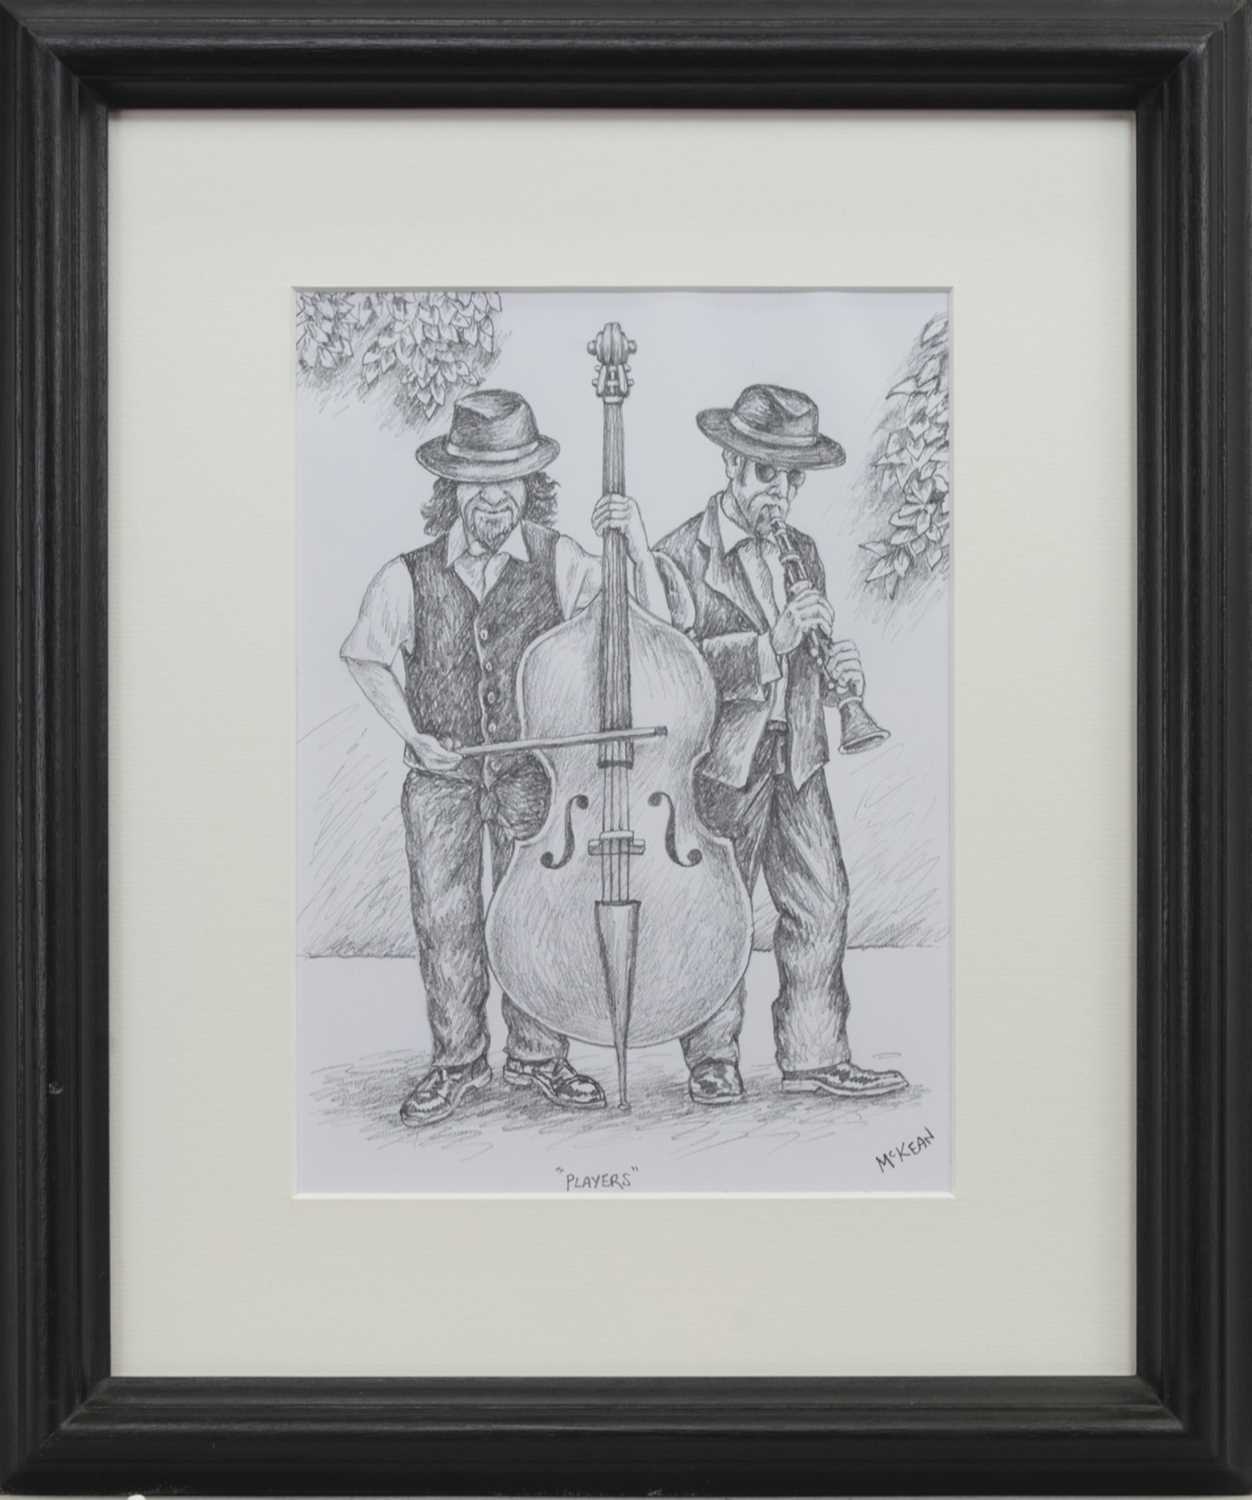 Lot 622 - PLAYERS, A PENCIL SKETCH BY GRAHAM MCKEAN